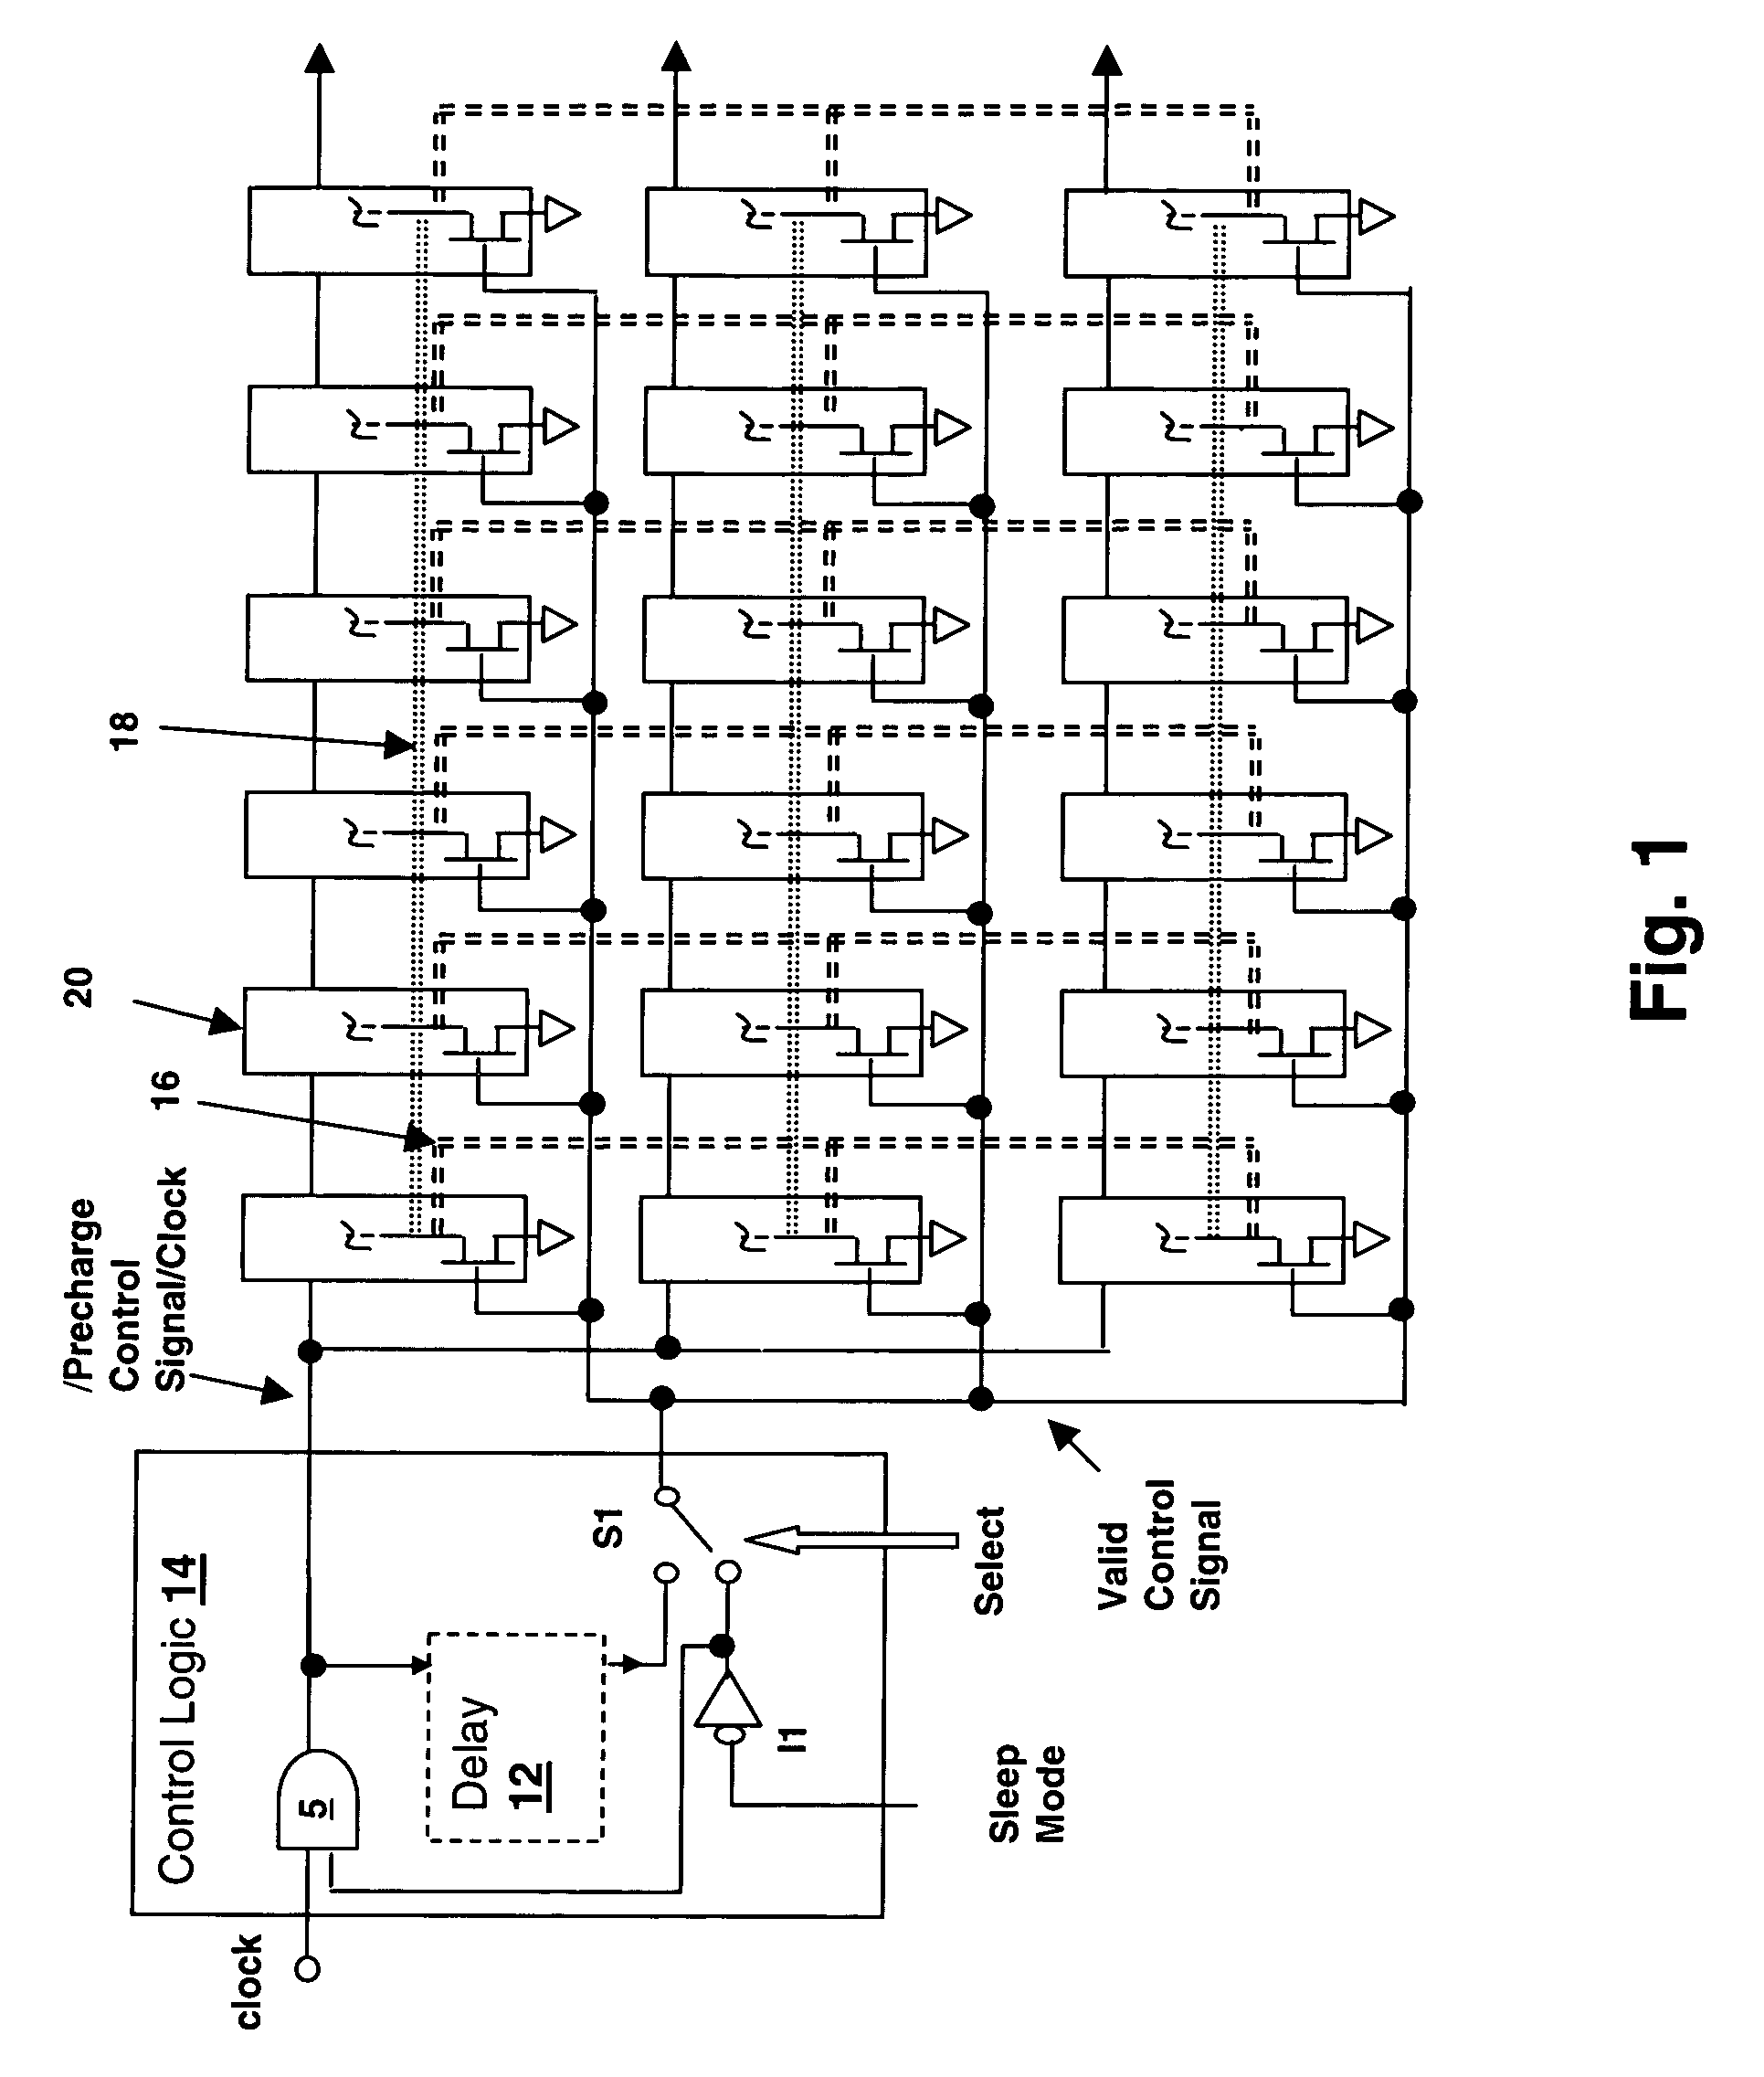 Dynamic logic circuit apparatus and method for reducing leakage power consumption via separate clock and output stage control